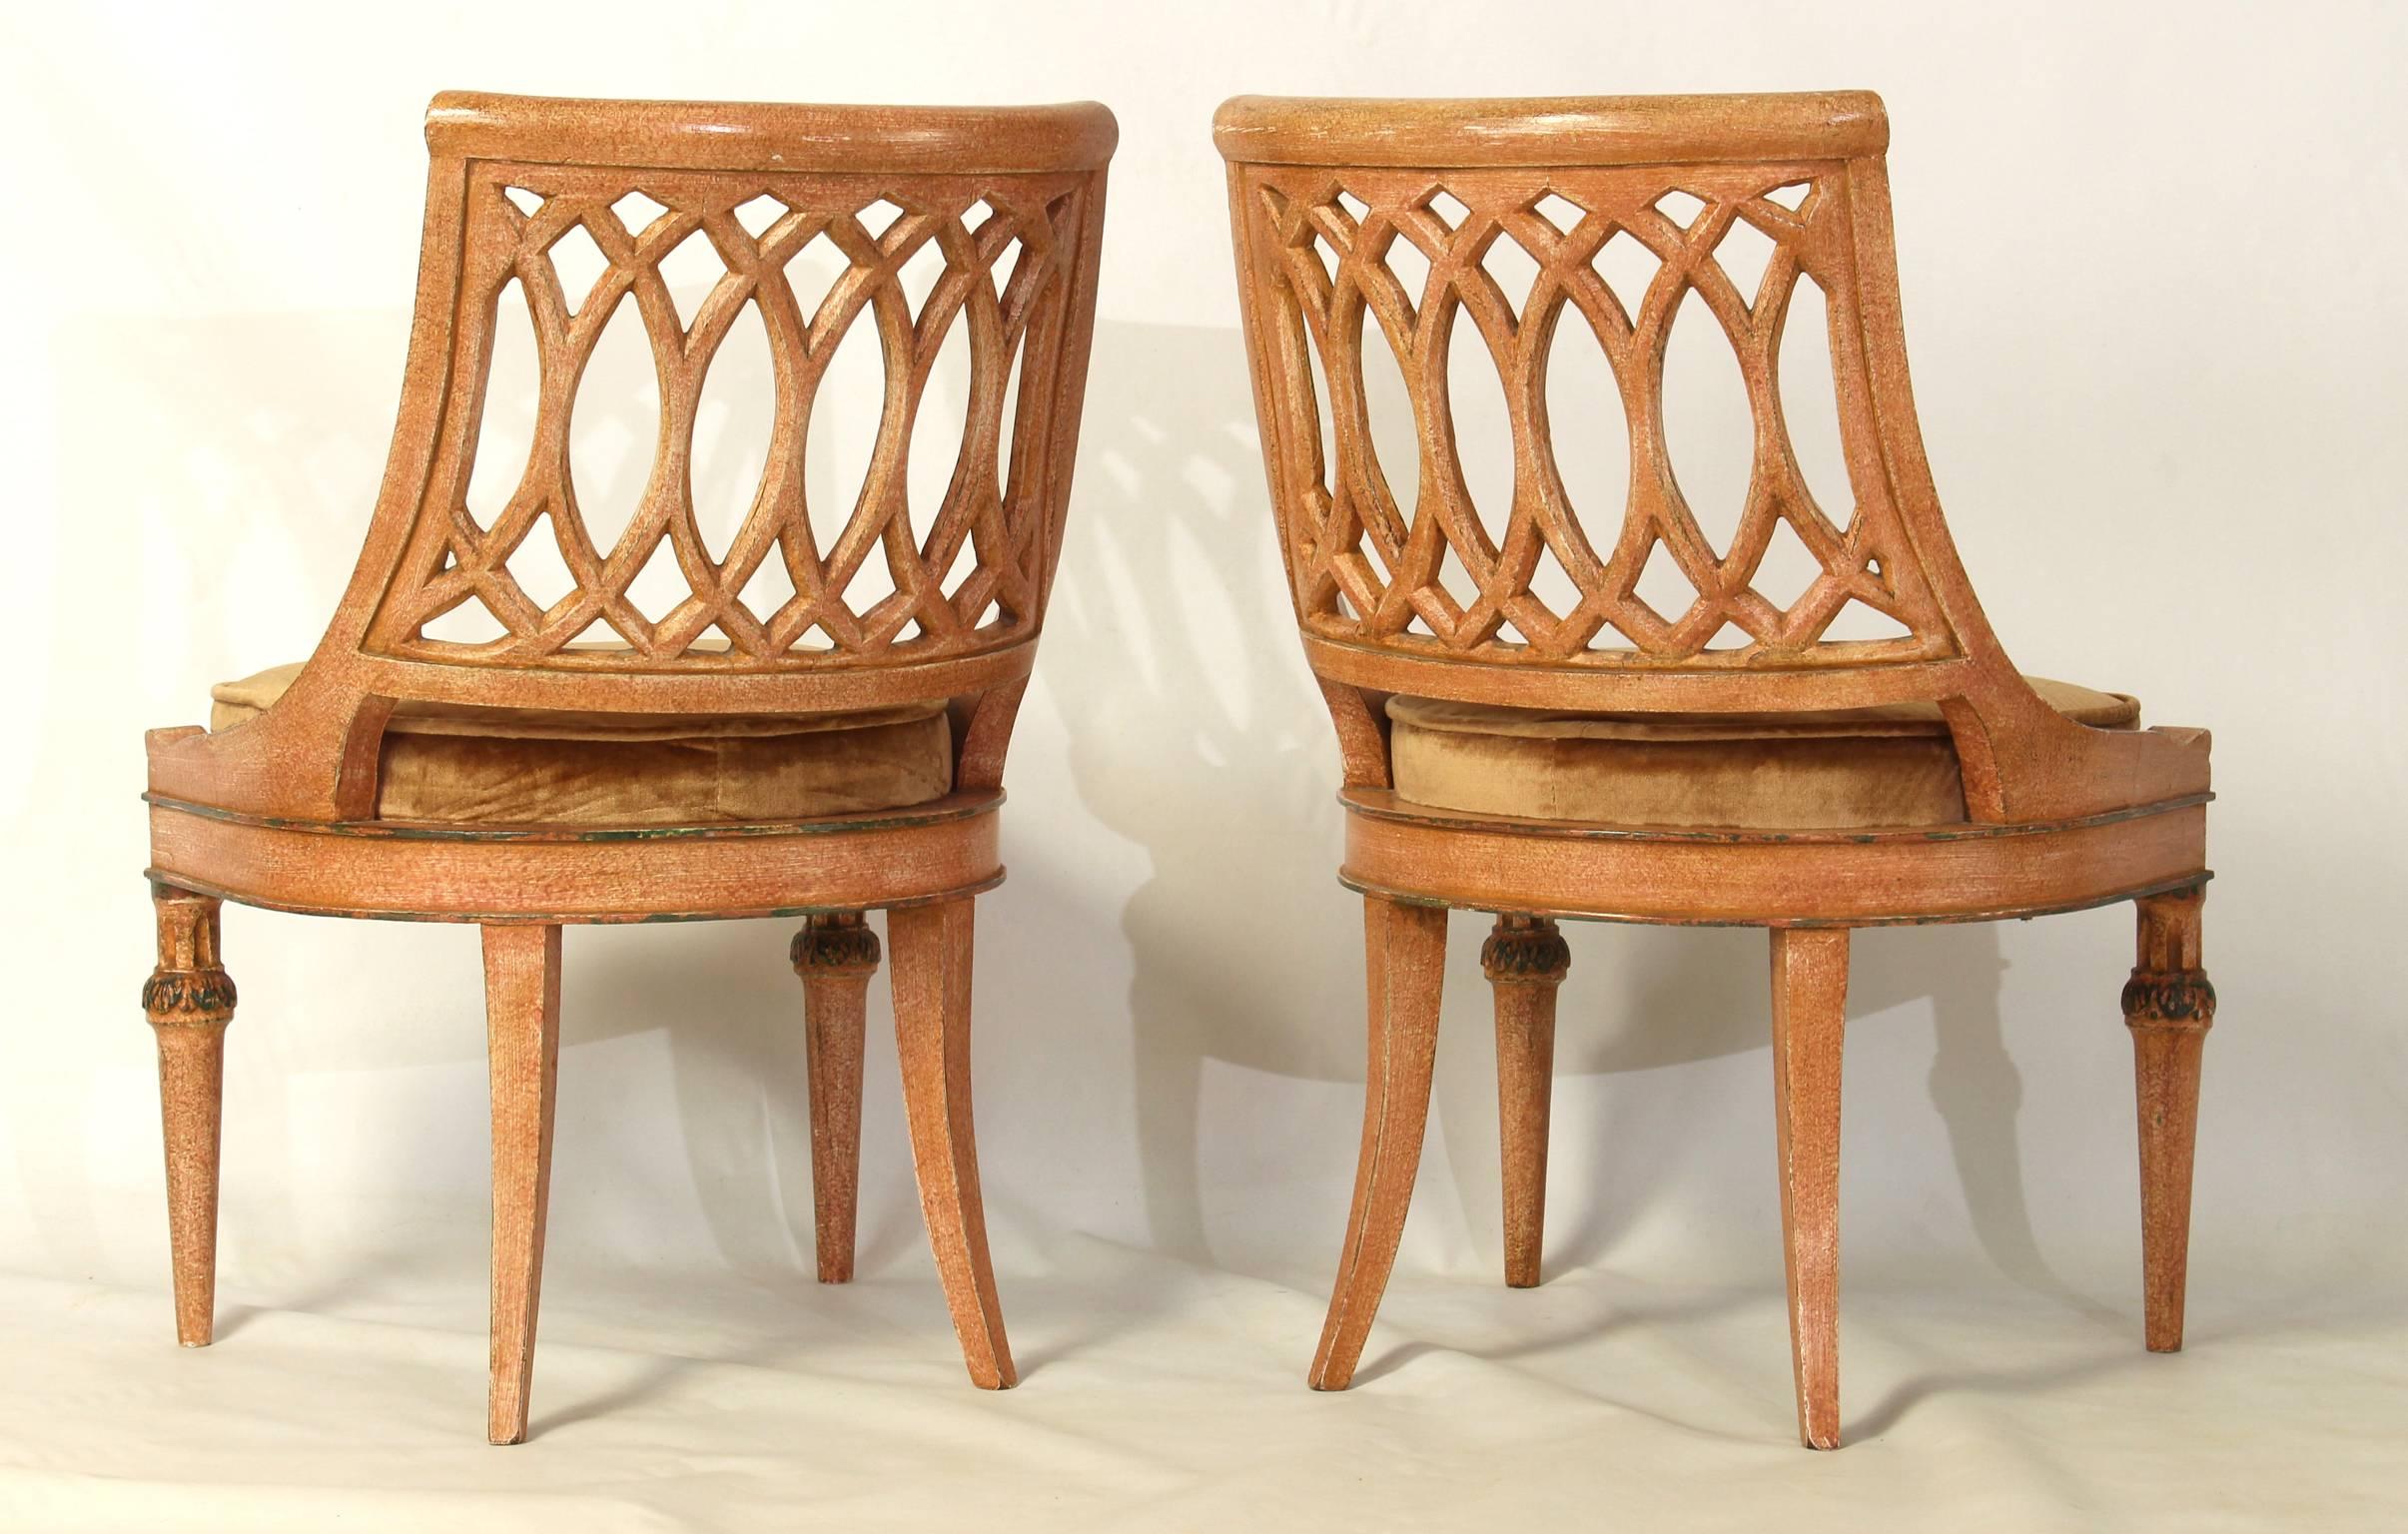 20th Century Pair of Diminutive Italian Carved Wood Slipper Chairs